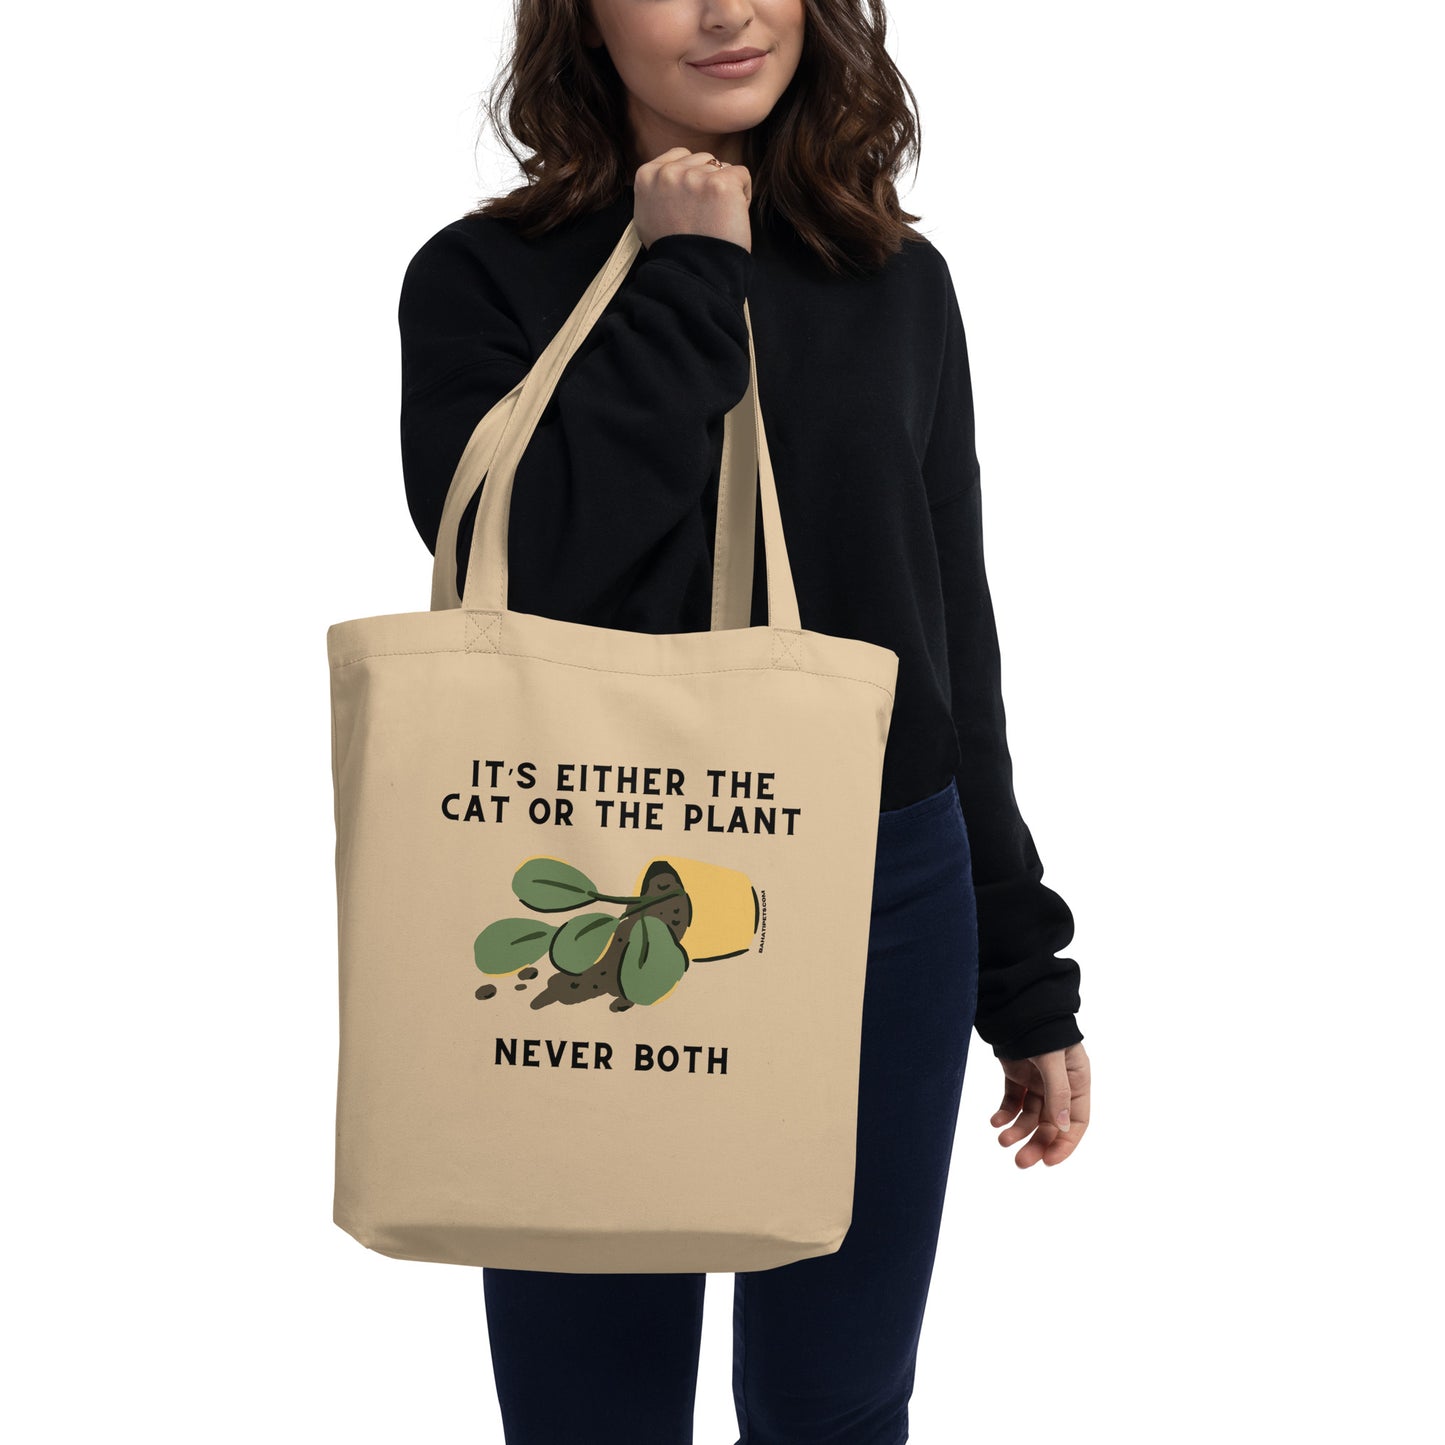 Its the cat or the plant Eco Tote Bag